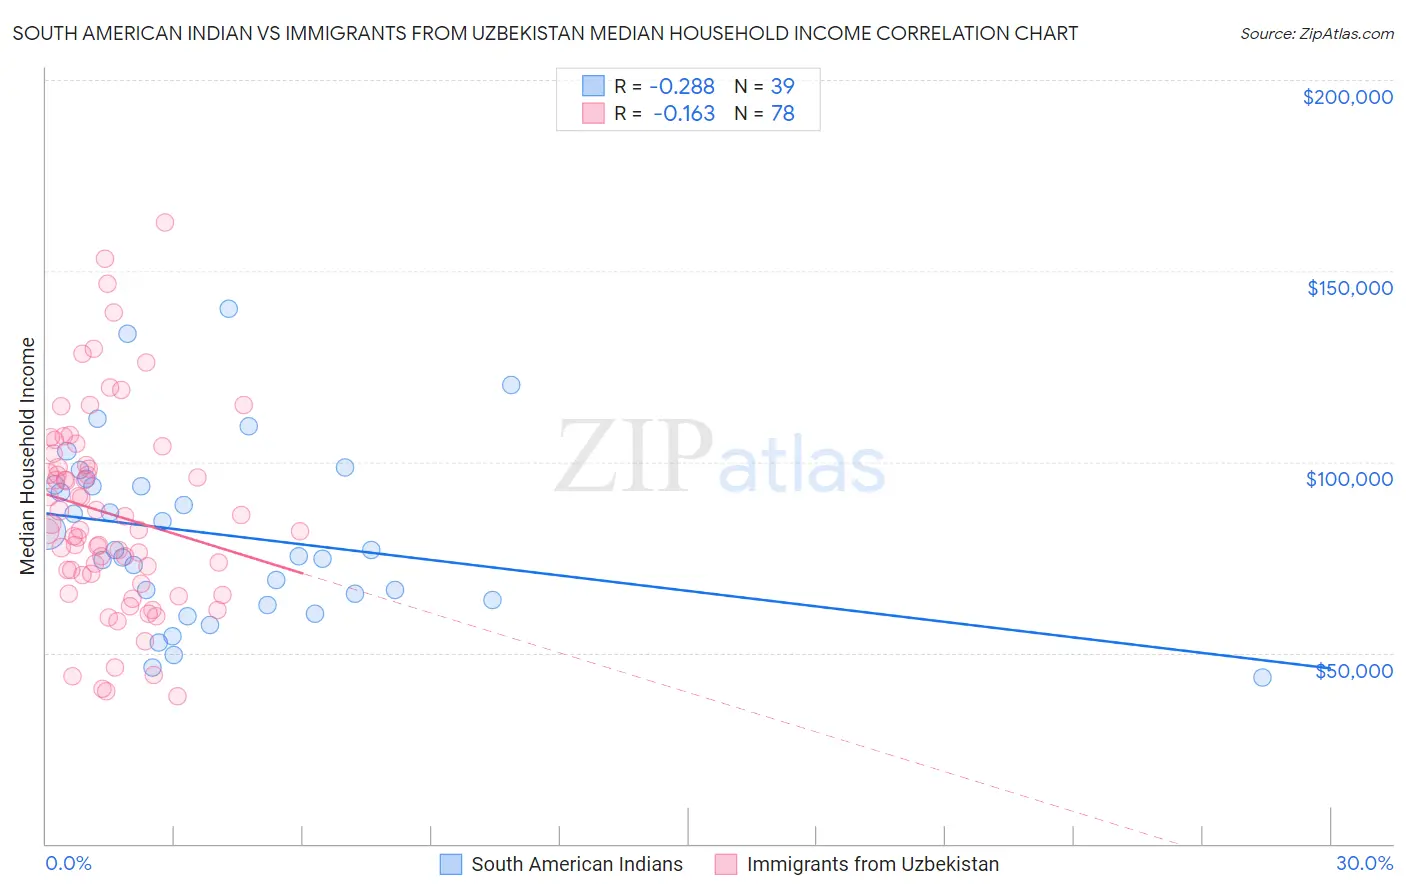 South American Indian vs Immigrants from Uzbekistan Median Household Income